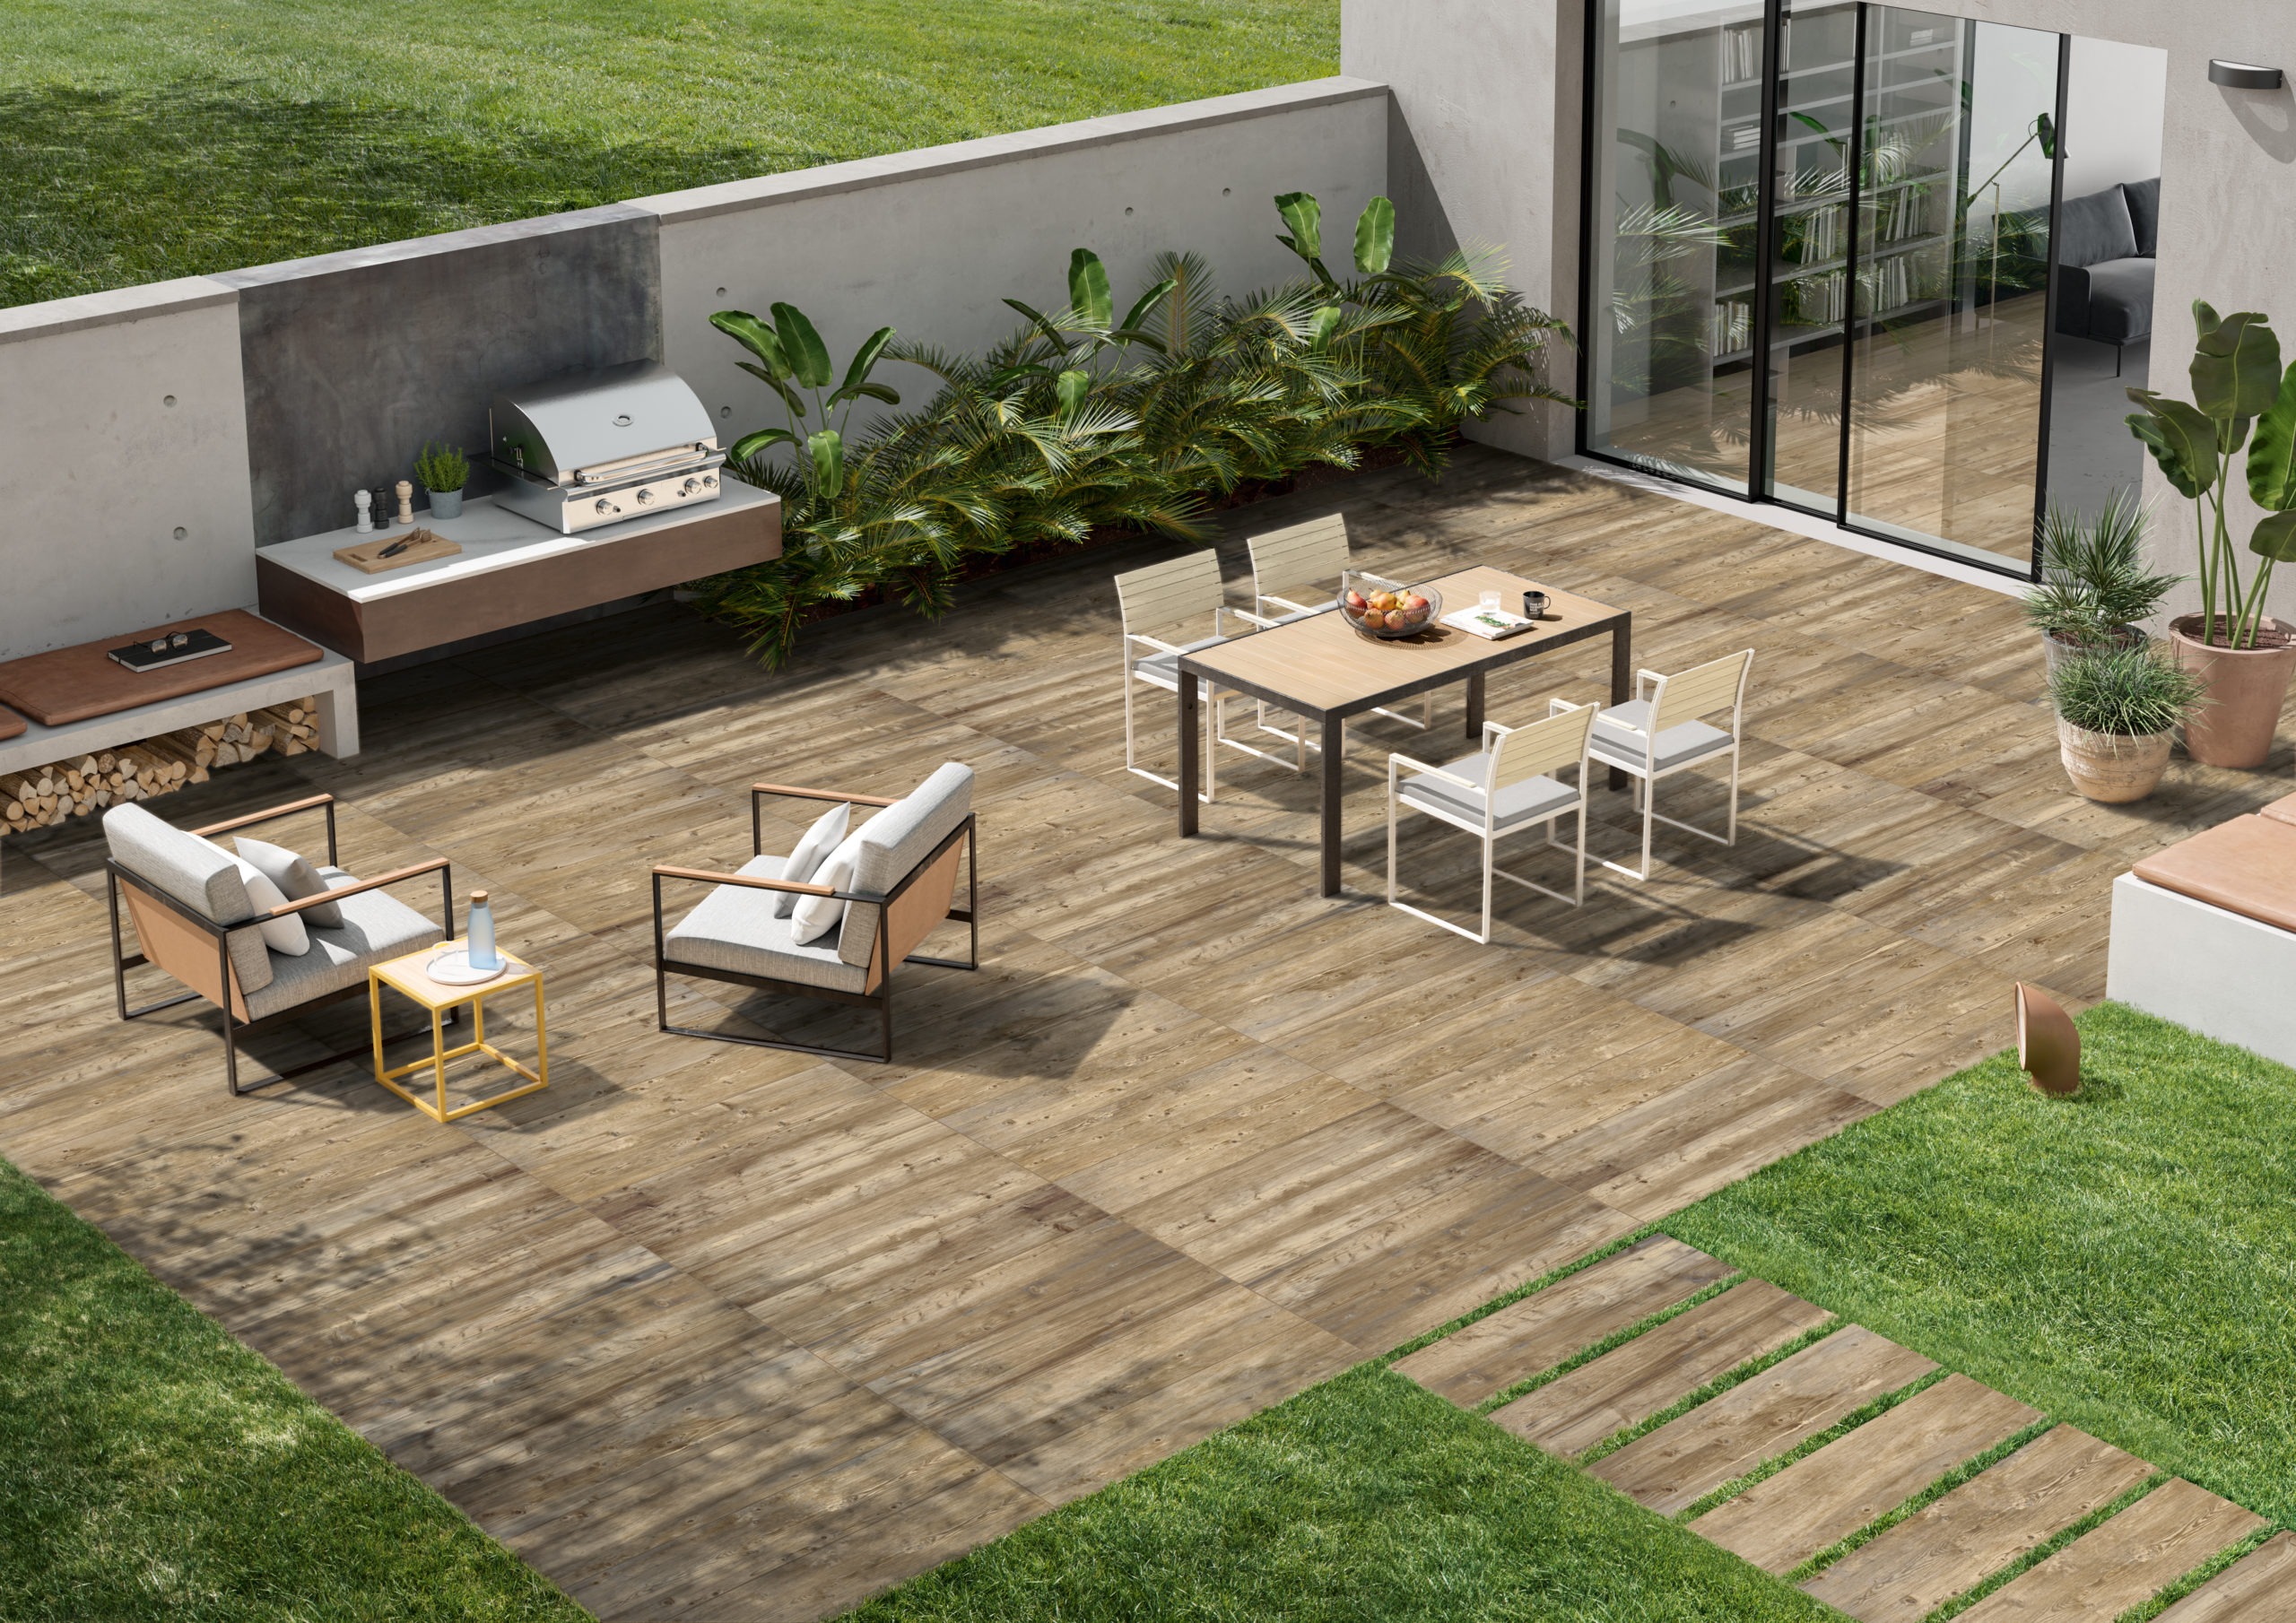 How to care for and maintain your new Outdoor Tile